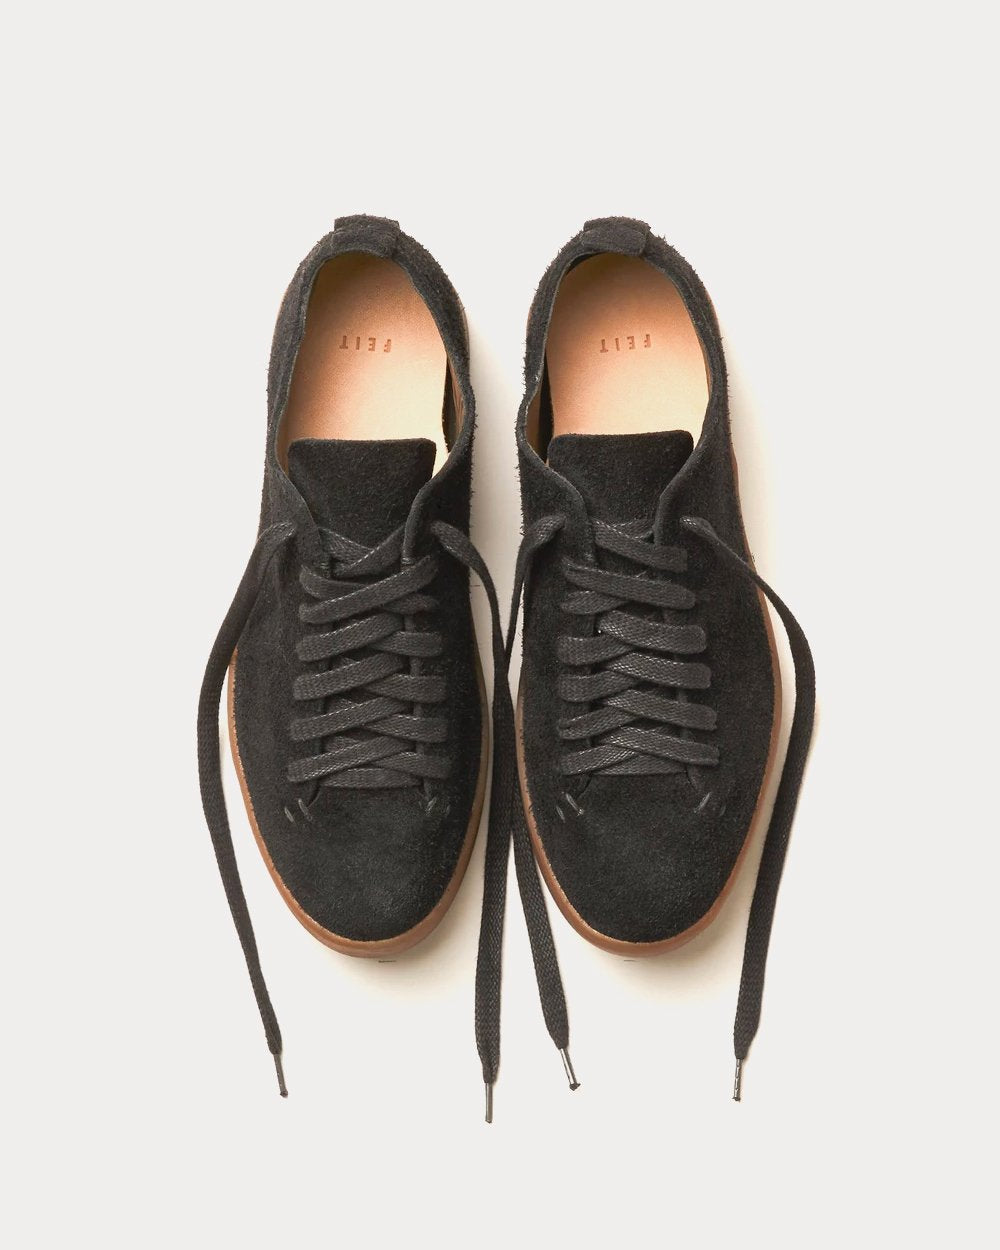 Feit - Hand Sewn Latex Suede Black Low Top Sneakers